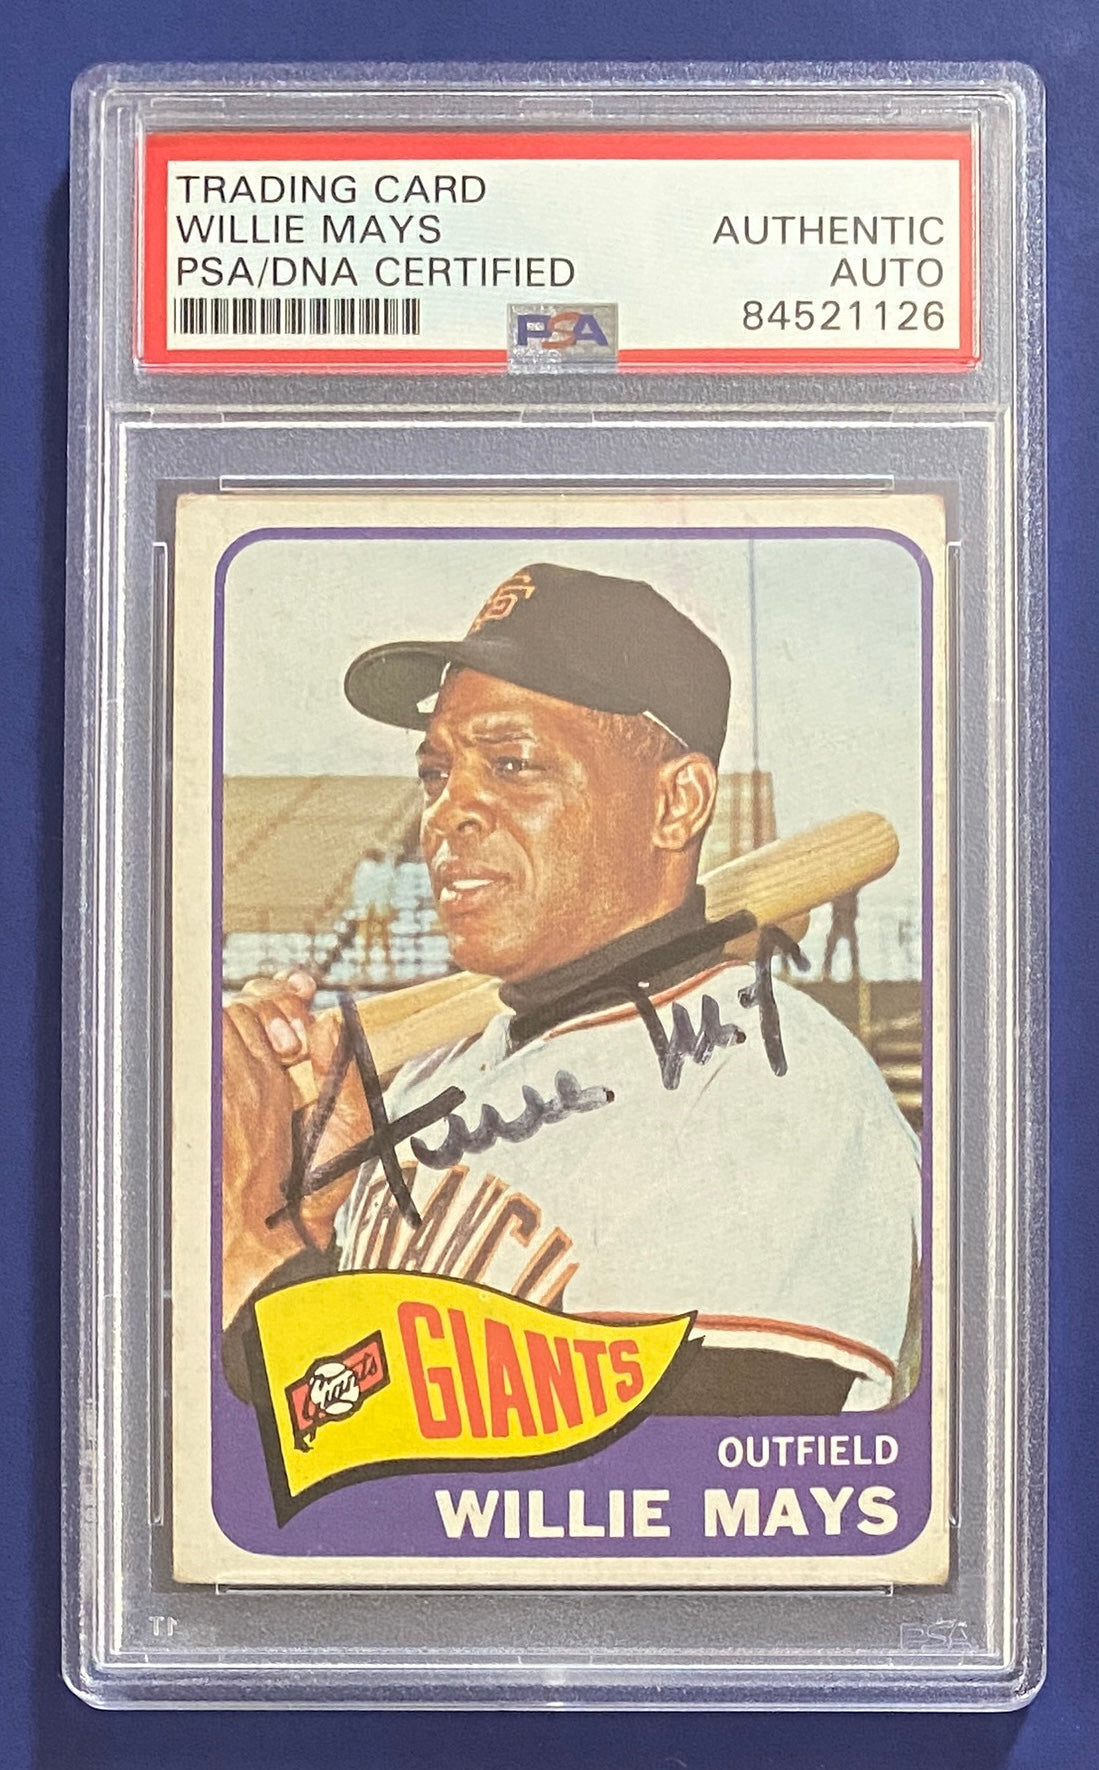 Willie Mays 1965 Topps PSA Authentic Auto